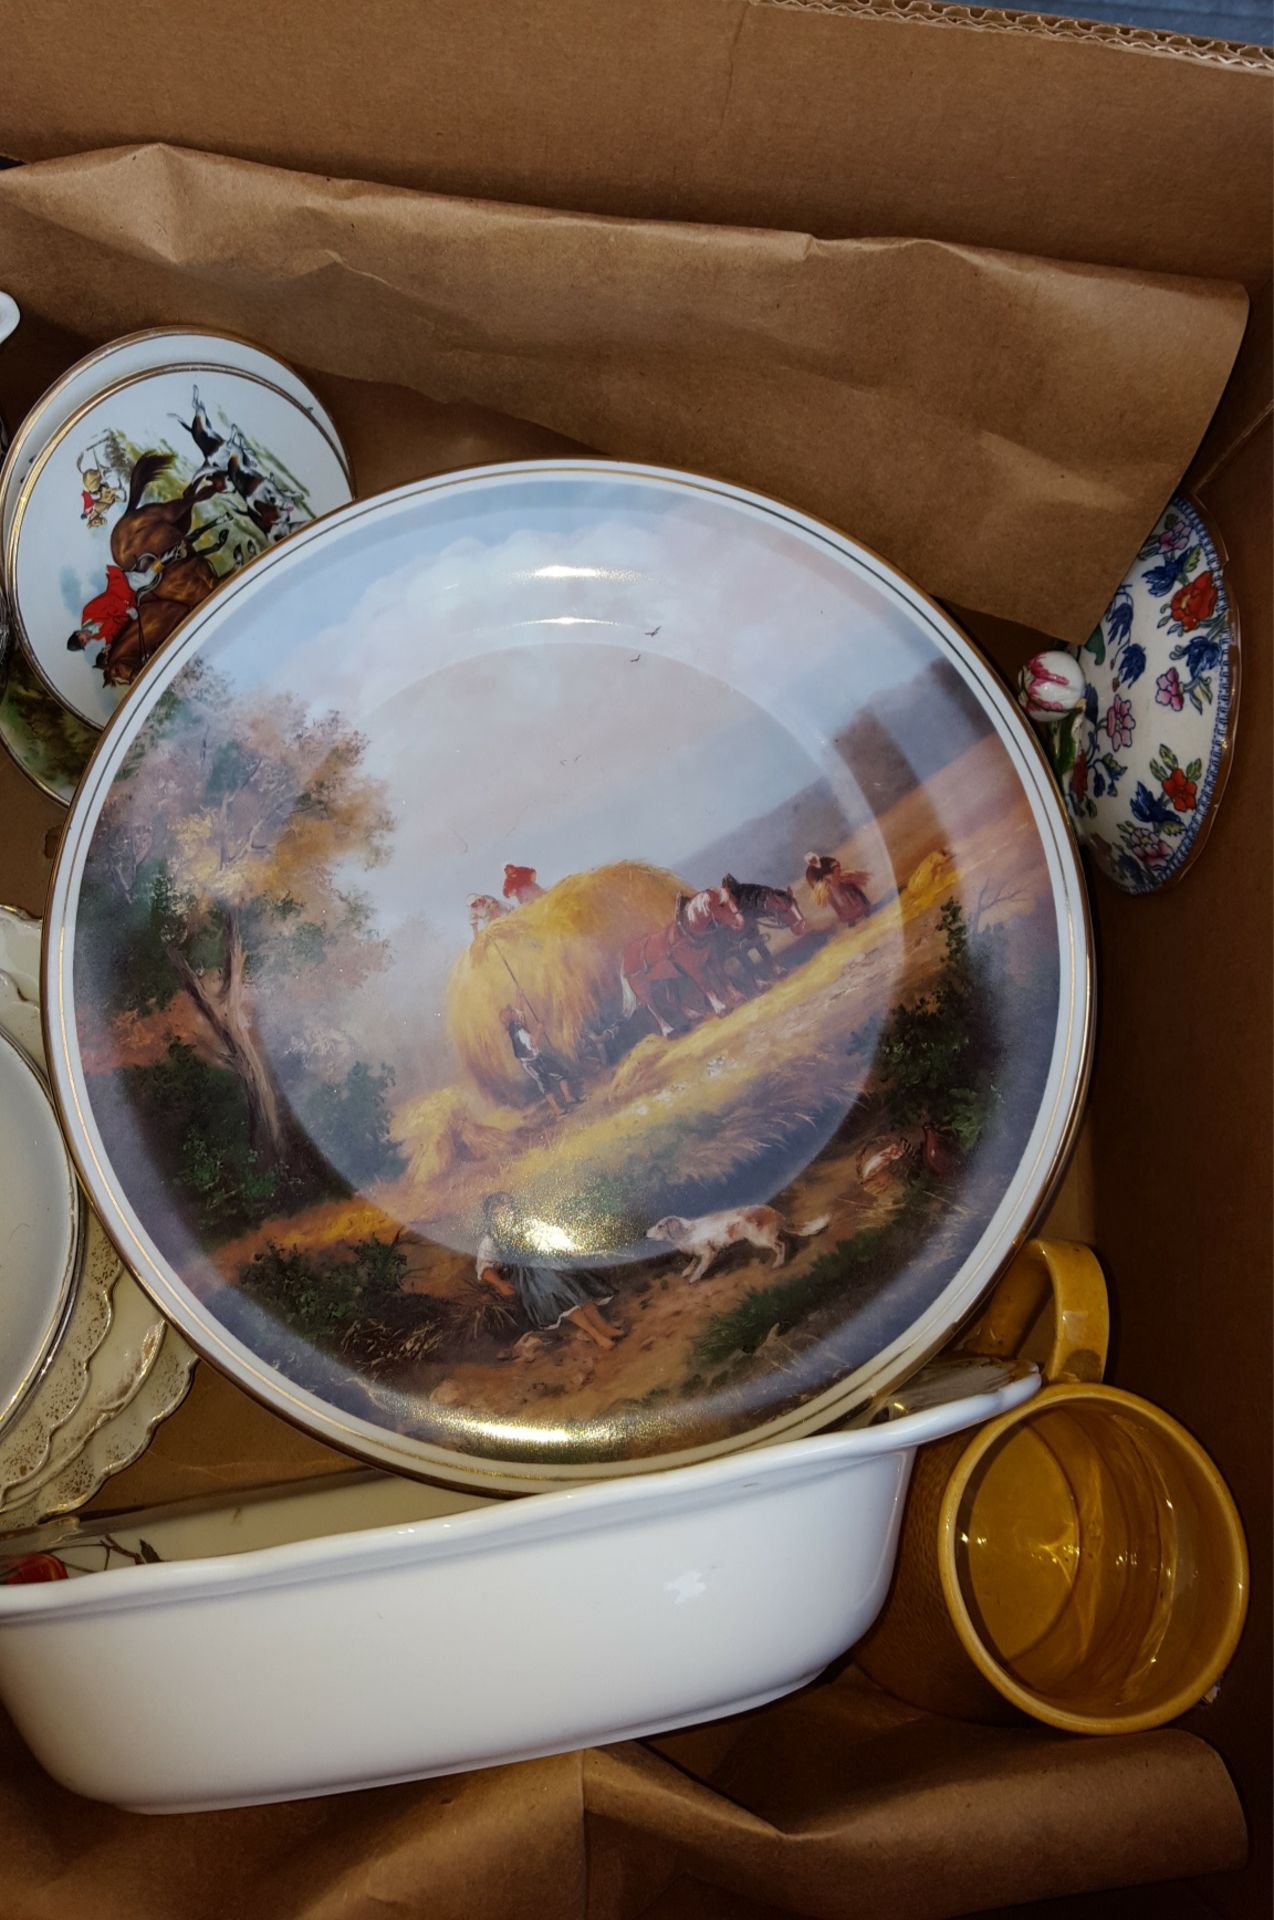 Box of Assorted Pottery & Decorative Plates with Country Scenes - Image 2 of 2